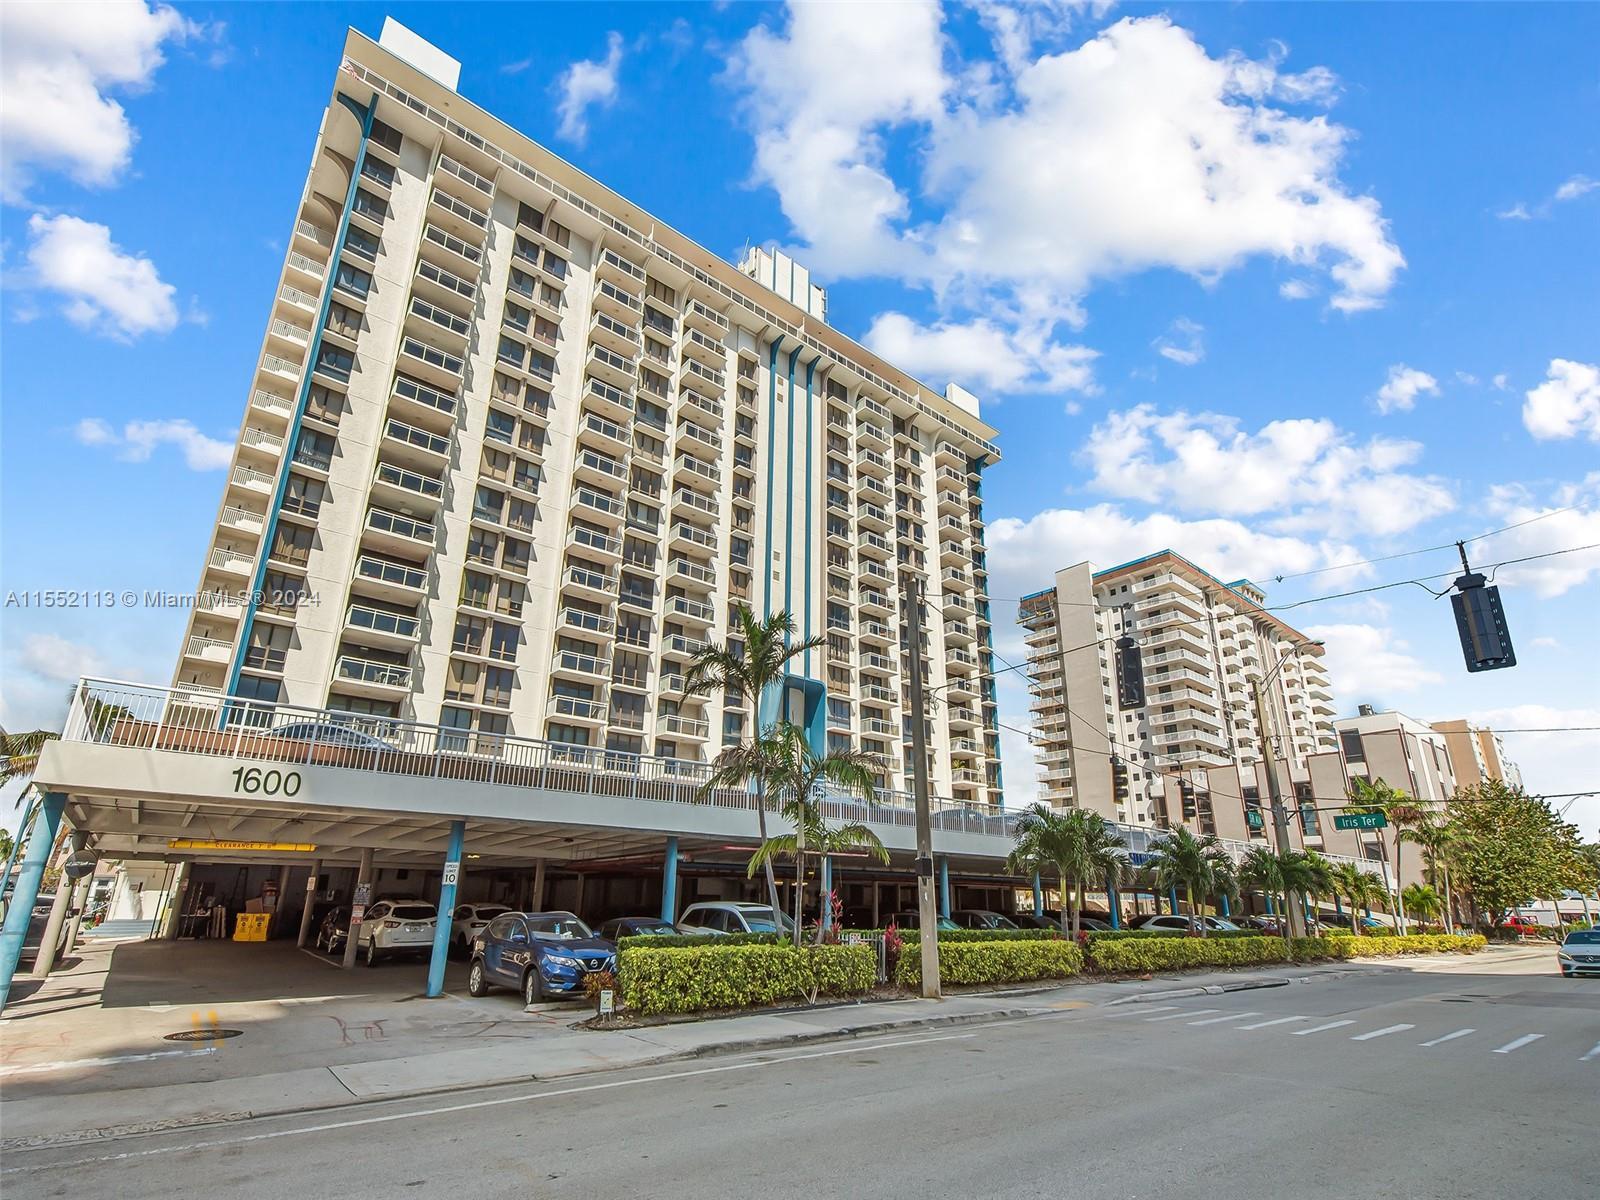 Photo of 1600 S Ocean Dr #4A in Hollywood, FL